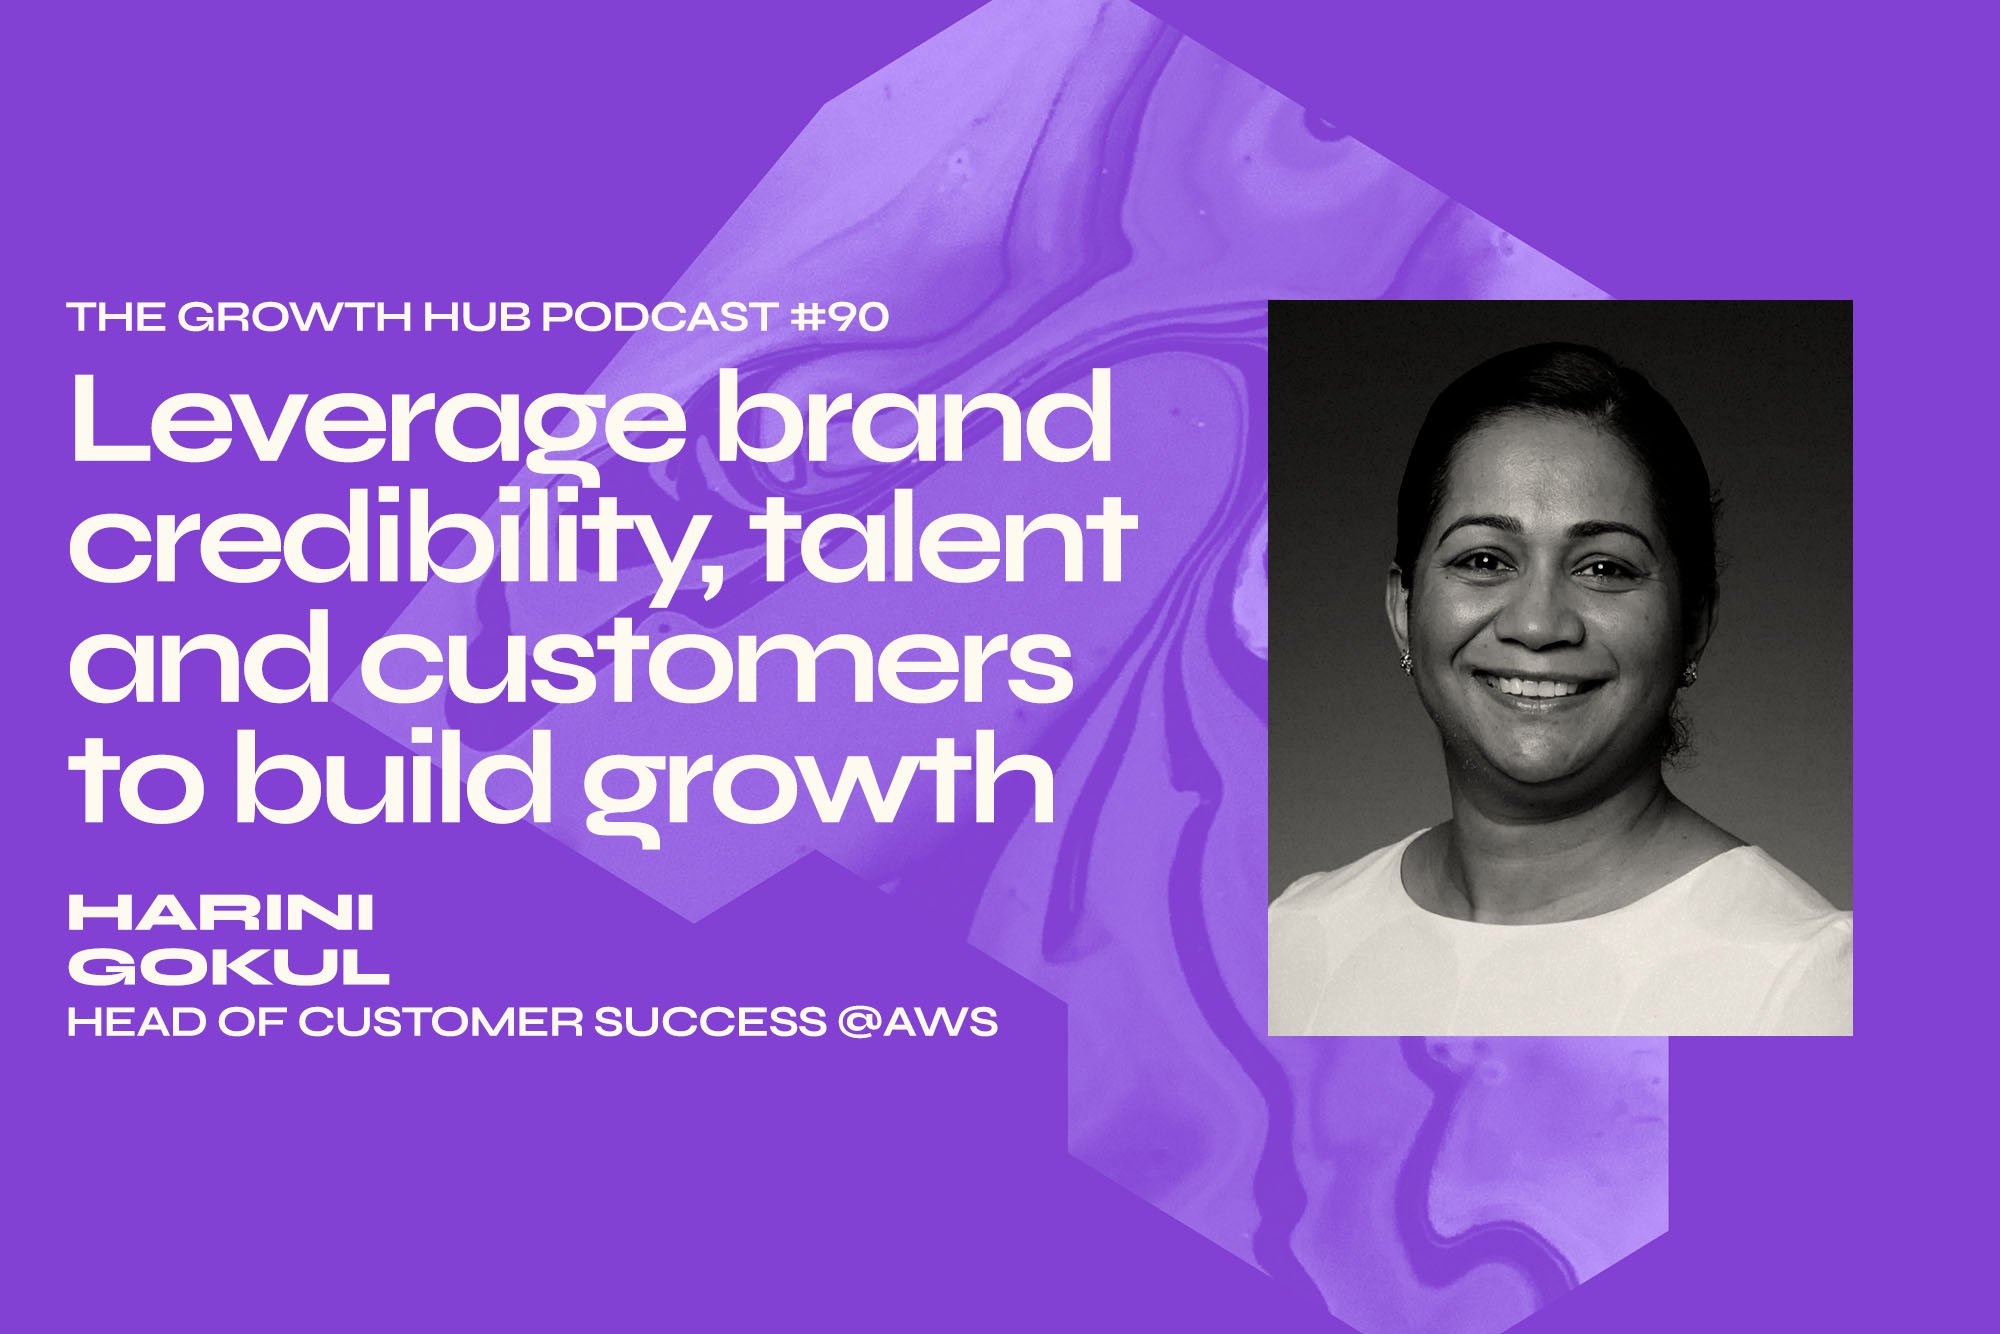 [Podcast] Leverage Brand Credibility, Talent and Customer Collaboration to Build Growth